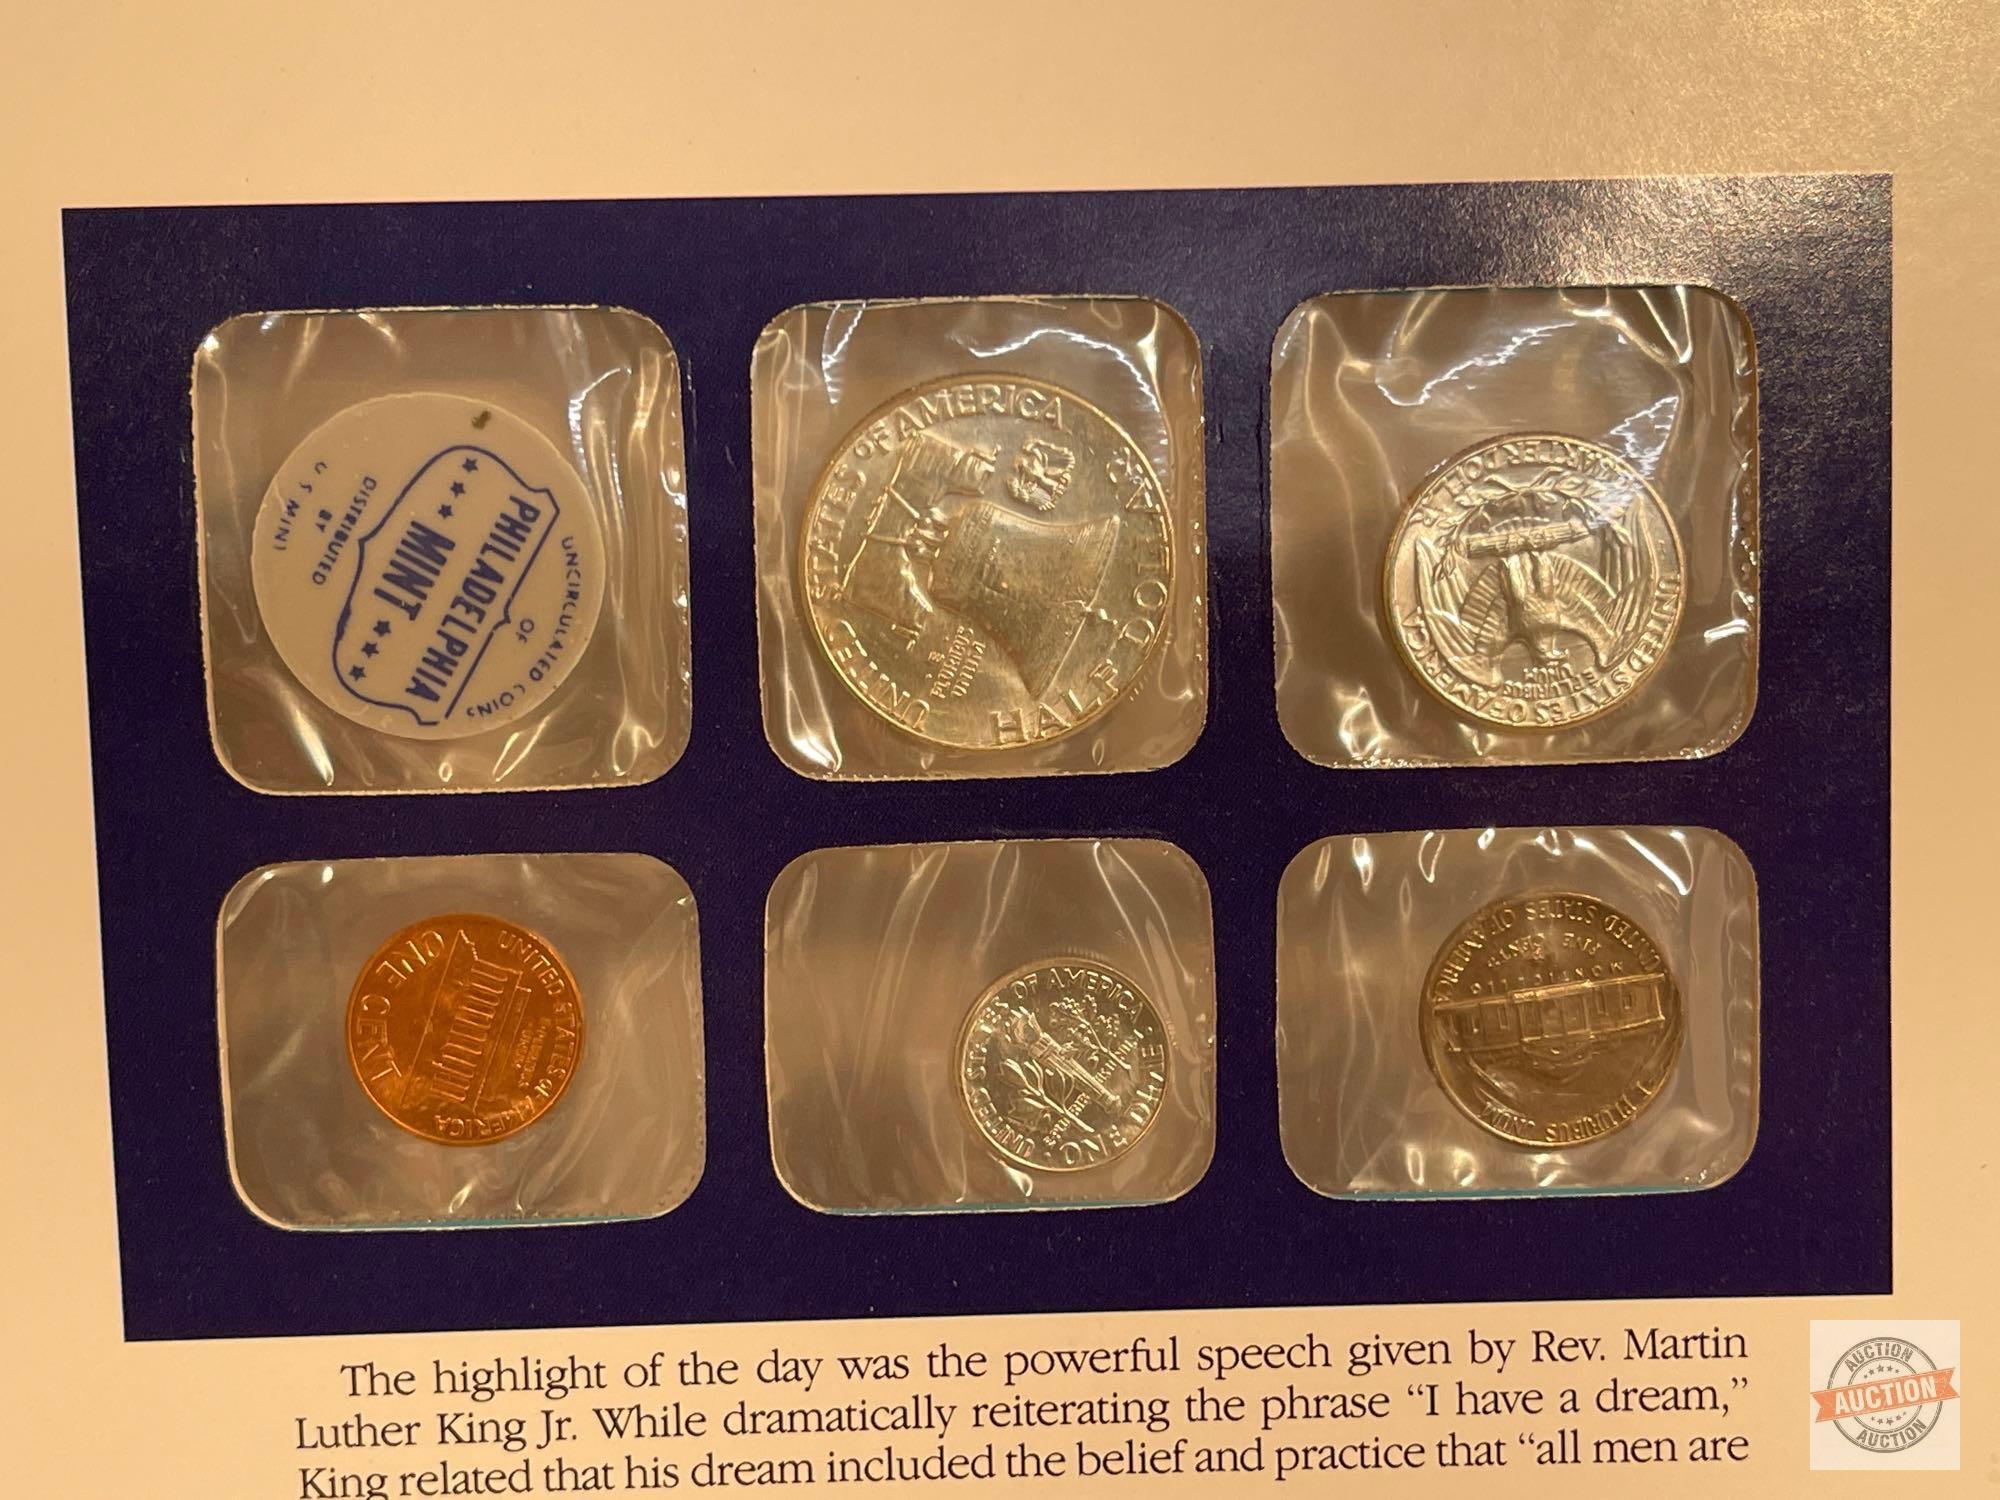 25 years of US uncirculated coin mint sets, PCS, 1963-1988